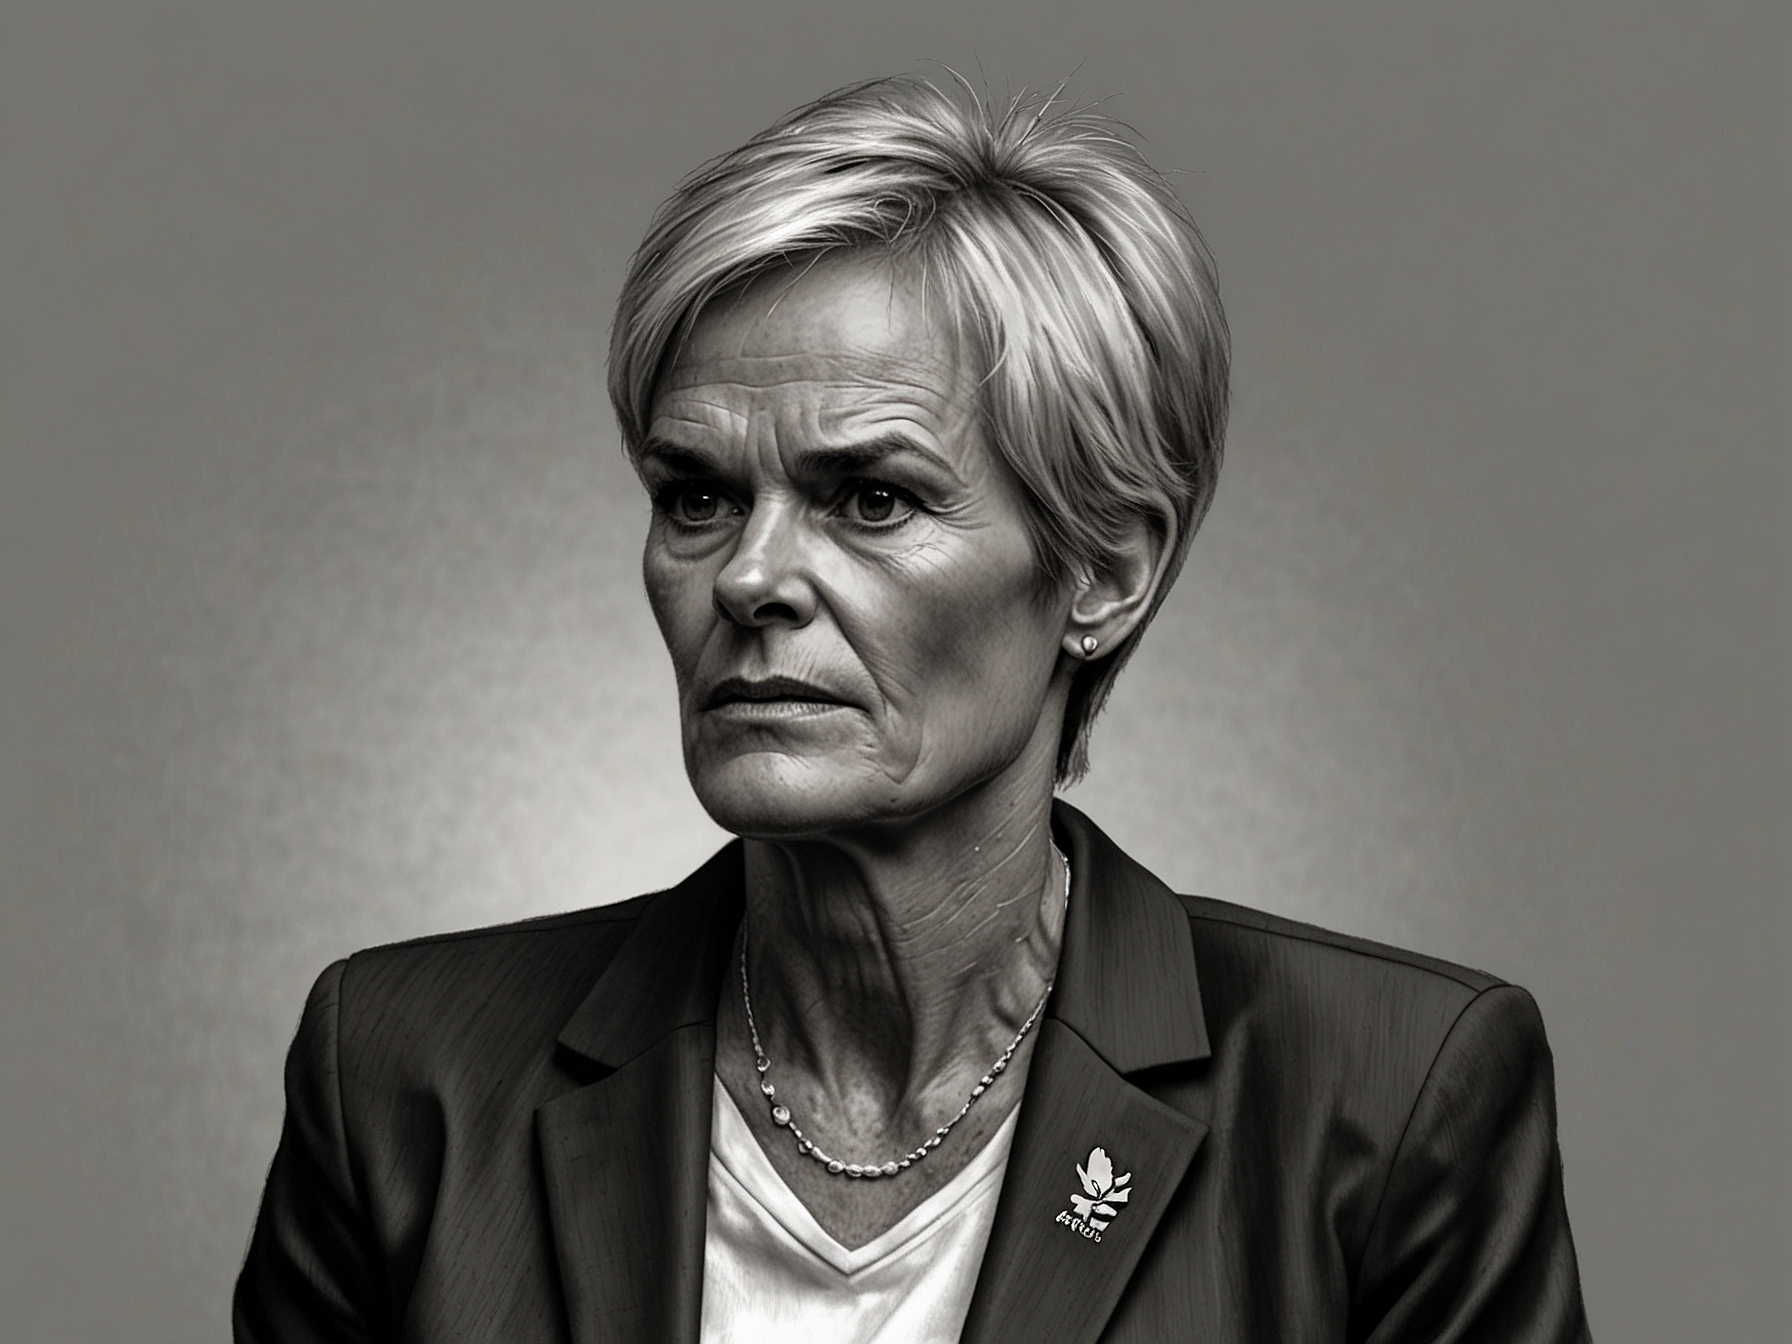 Judy Murray speaking passionately to the media, expressing her disappointment over the breach of Andy Murray's medical privacy, reflecting her concern and frustration.